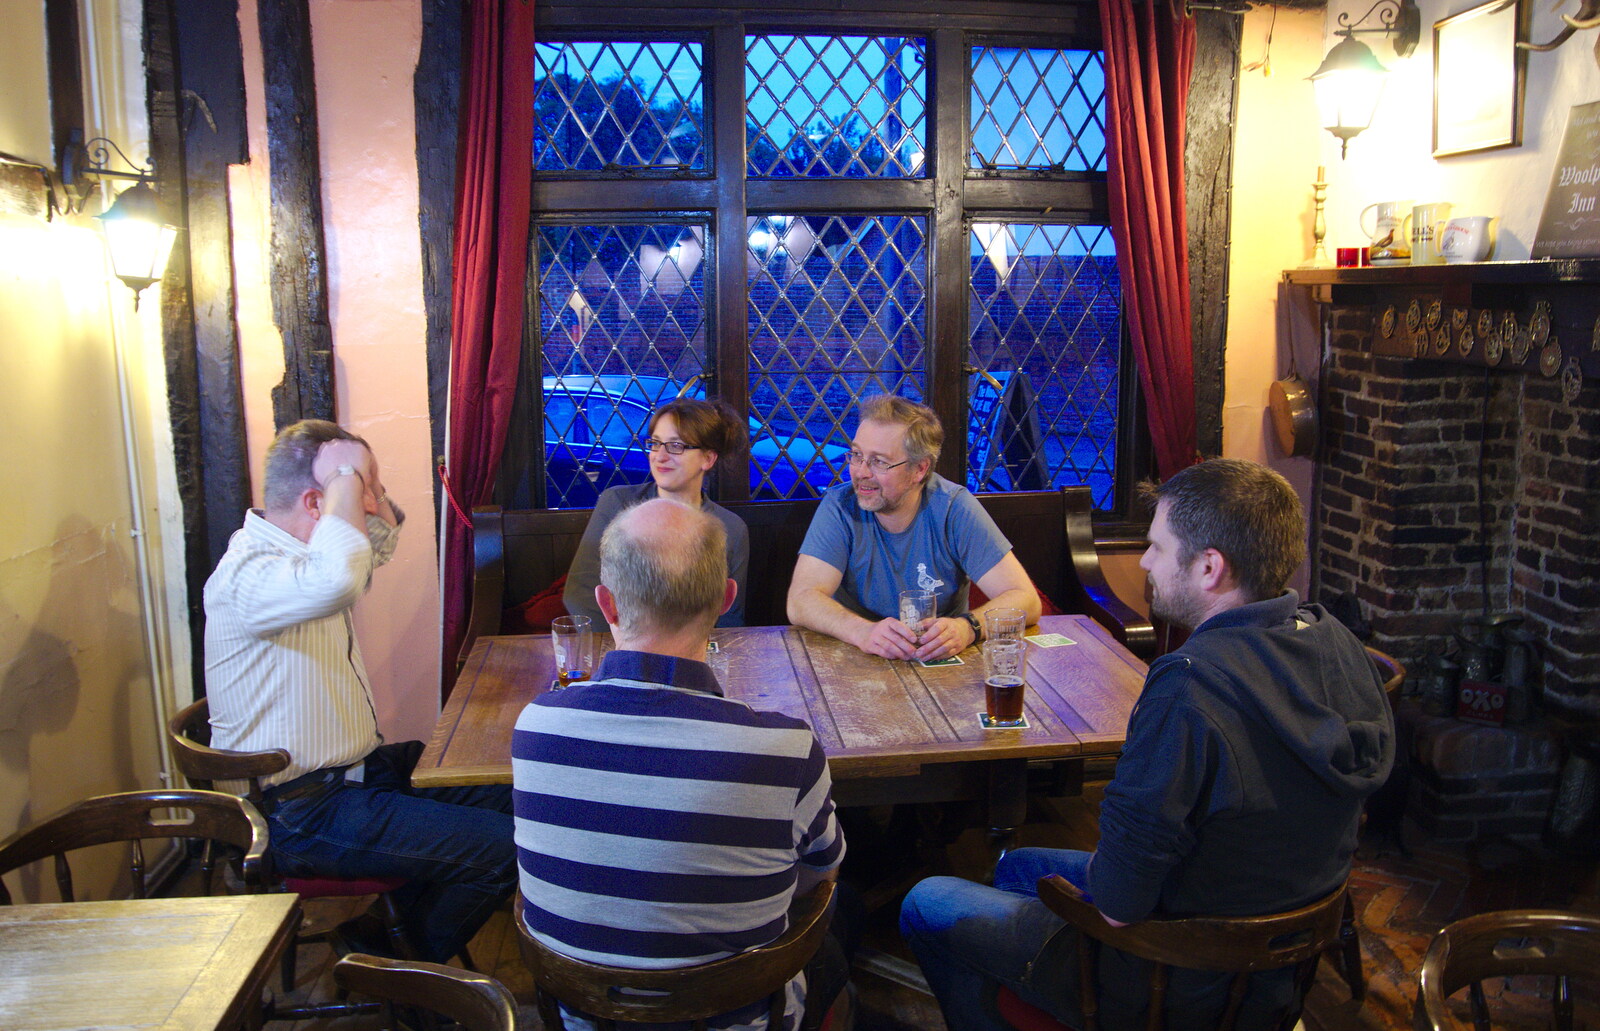 Conversation in the Woolpack from The BSCC Bike Ride 2019, Coggeshall, Essex - 11th May 2019